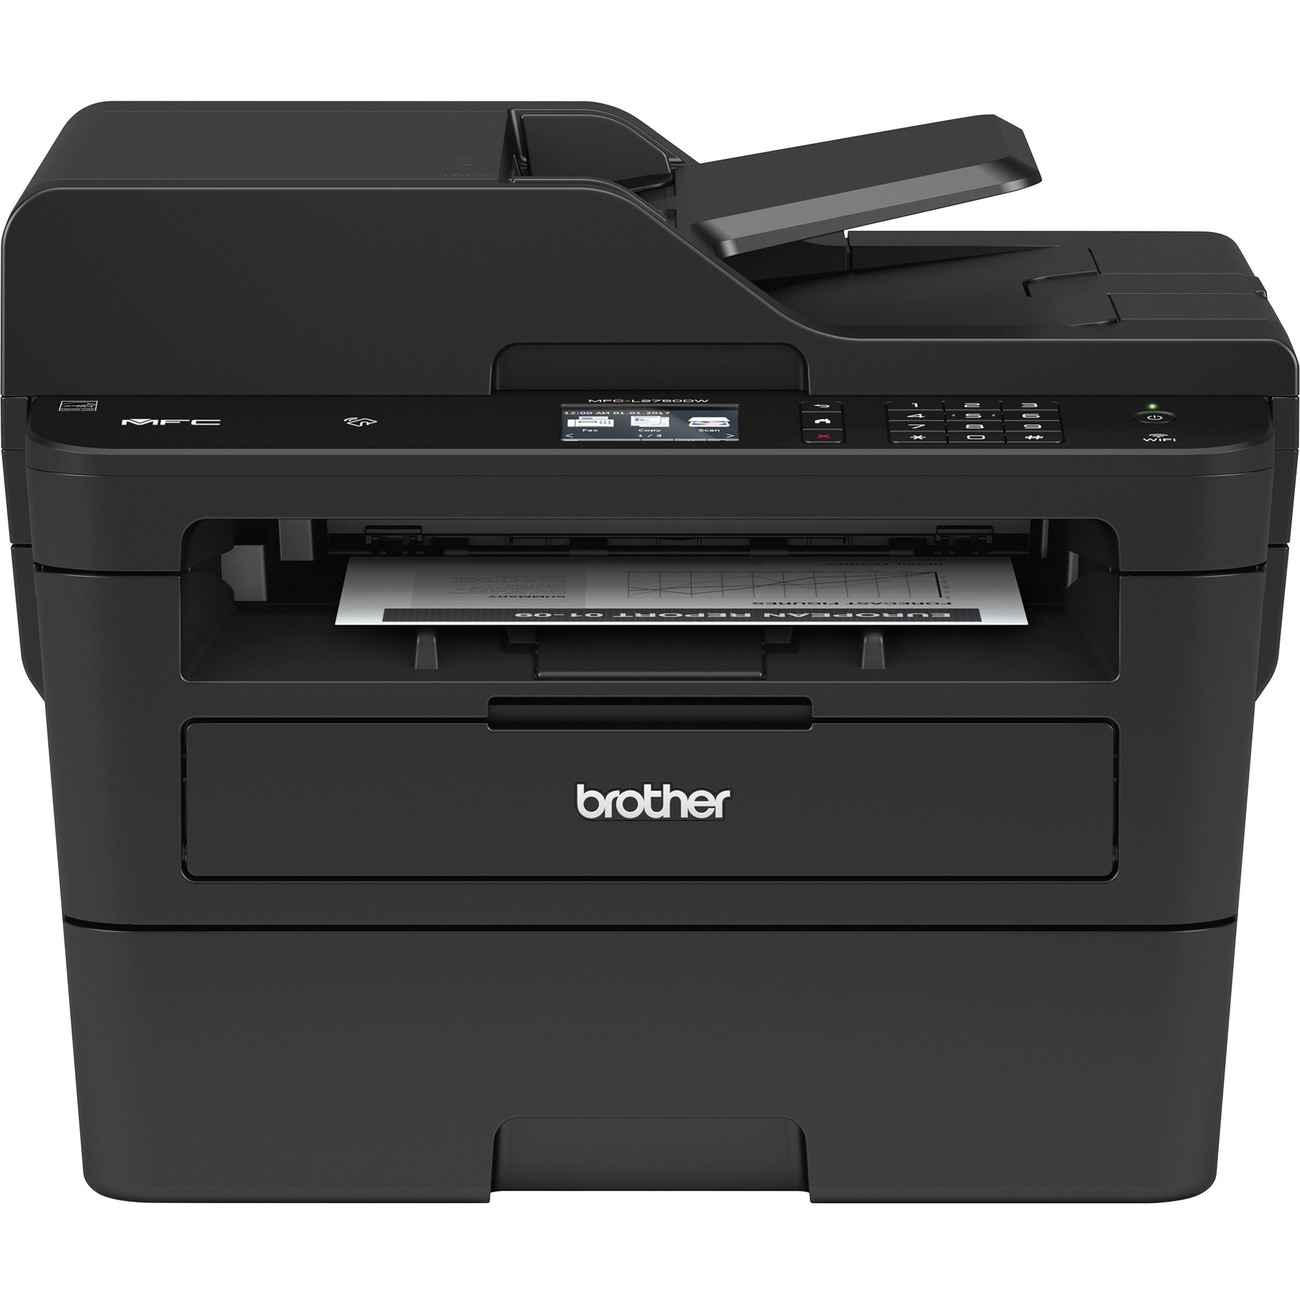  Brother Color MFC-L3770CDW Digital All-in-One Wireless Laser  Printer, White - Print Copy Scan Fax - 3.7 Touch, 25 ppm, 2400 x 600 dpi,  Auto Duplex Printing, 50-Sheet ADF, Ethernet, NFC, Tillsiy